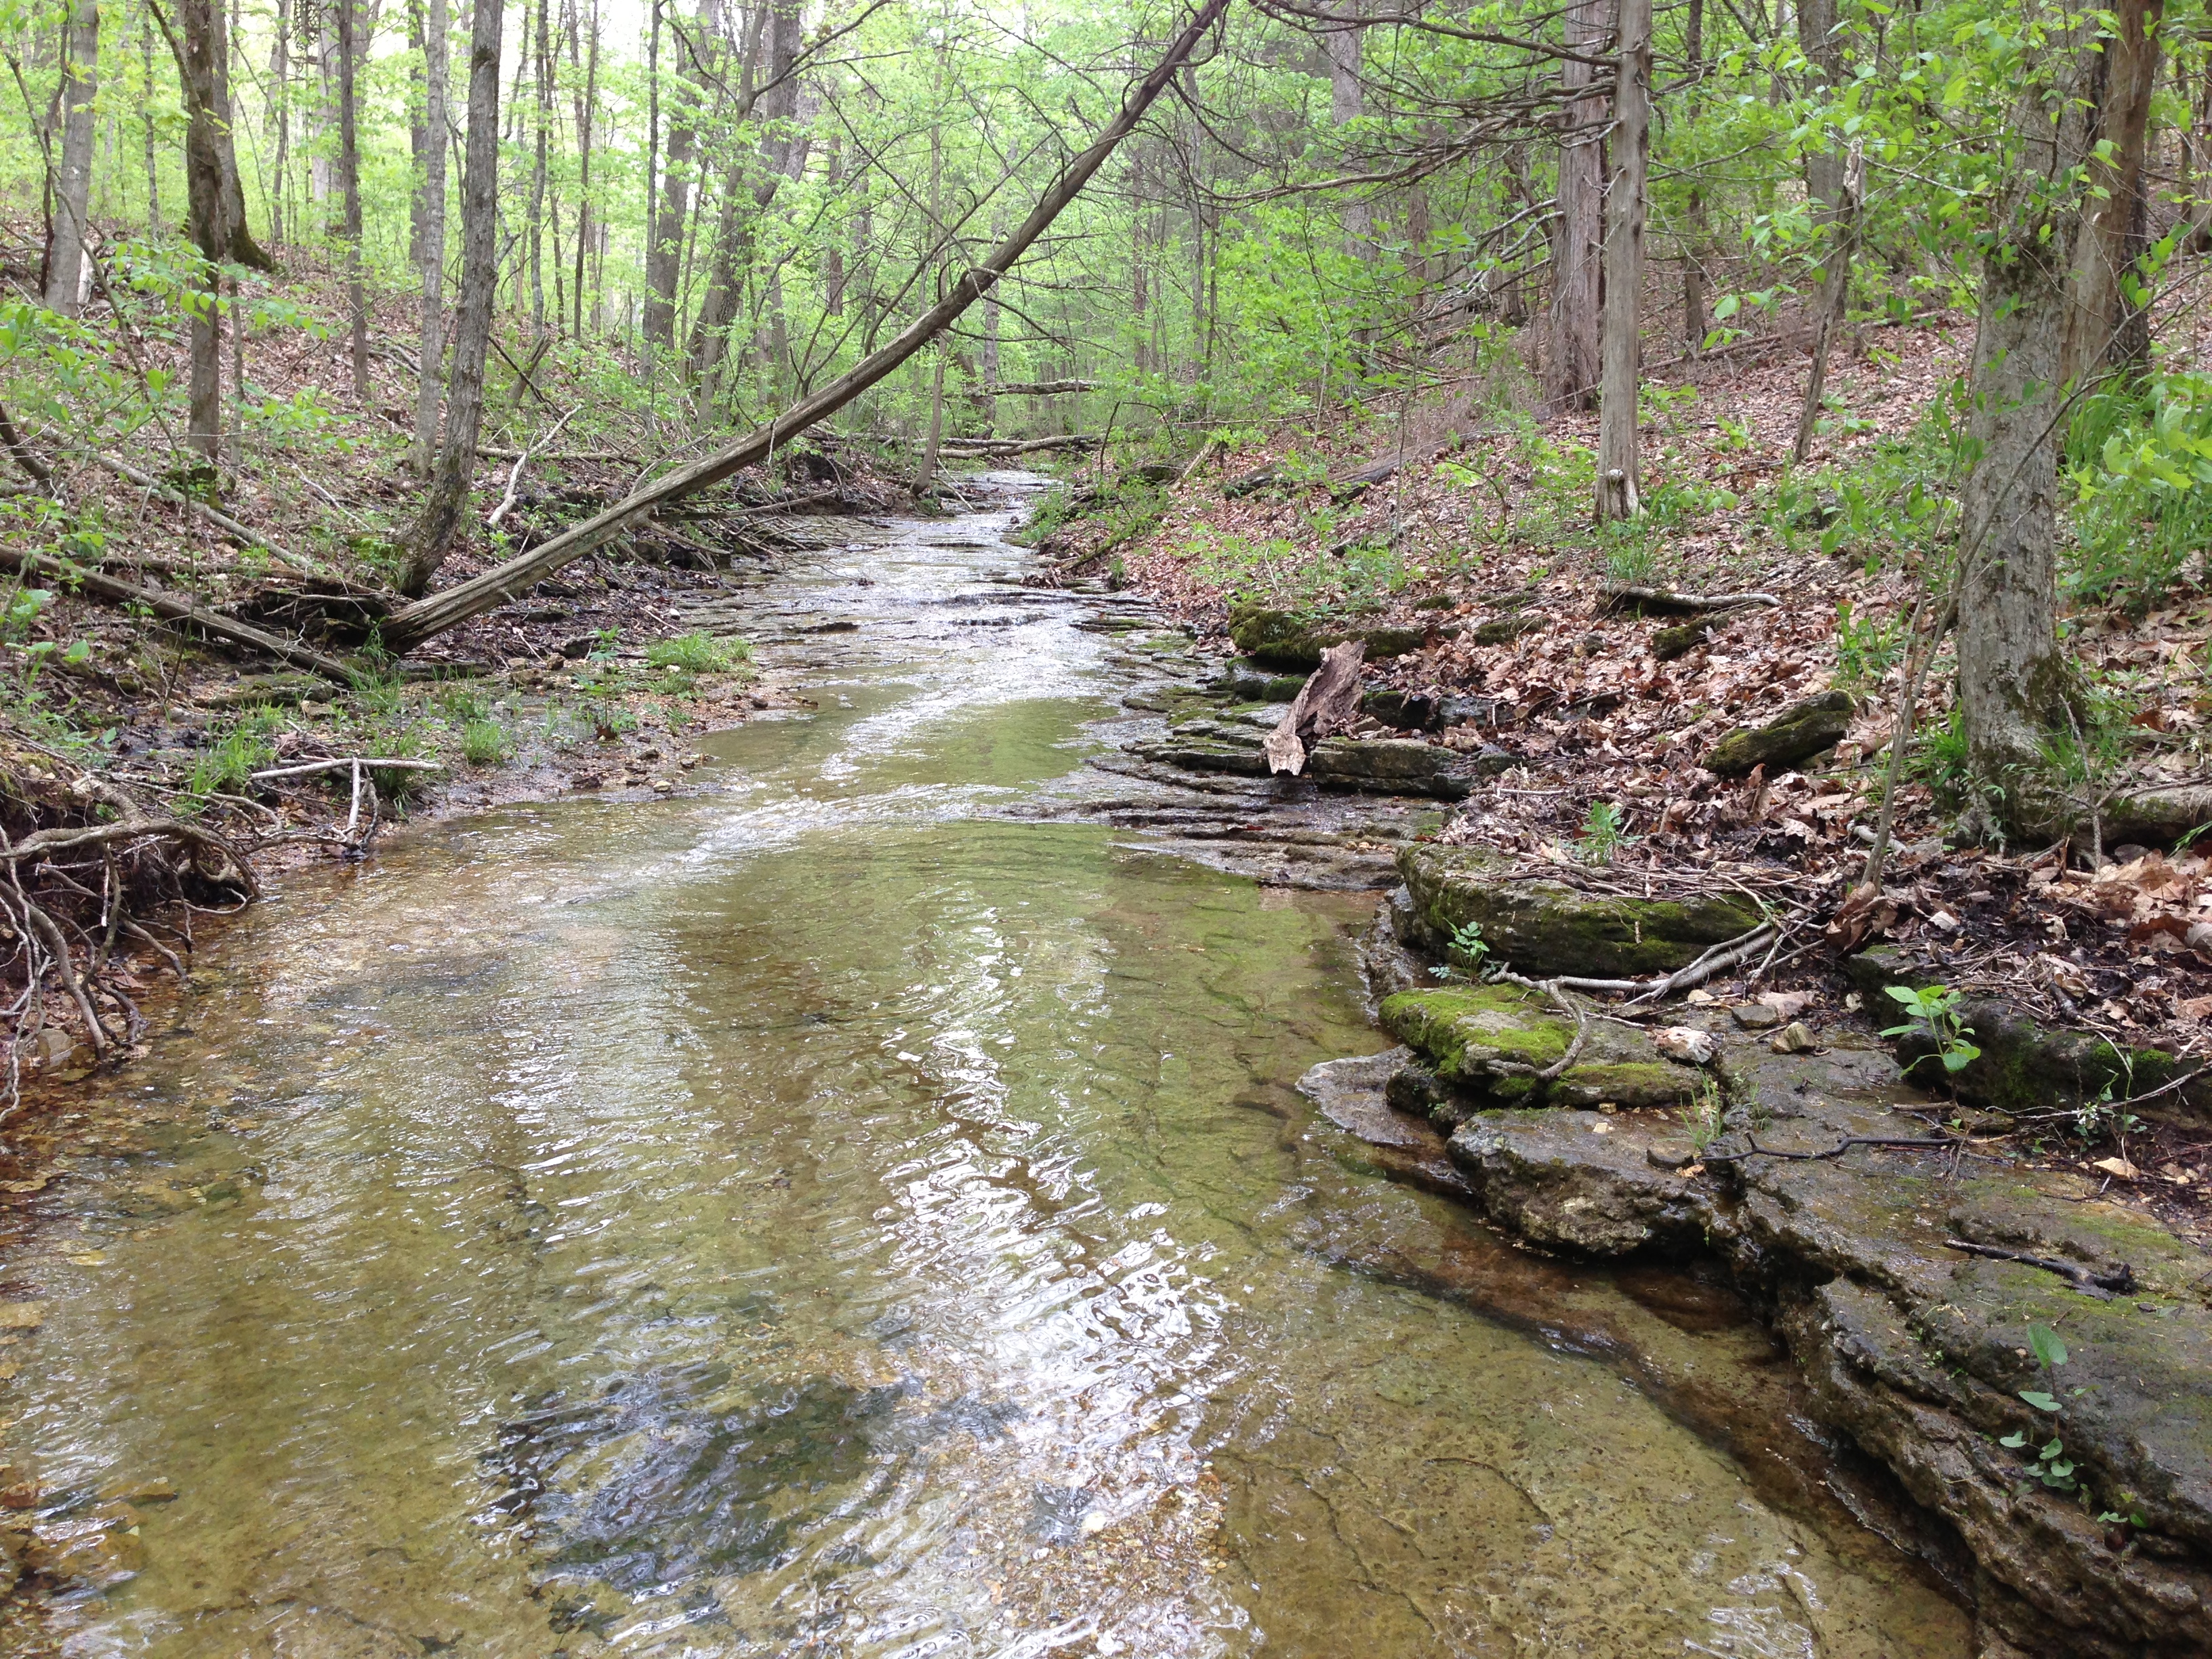 Land protected by conservation easement through ORLT, Missouri Land Trust